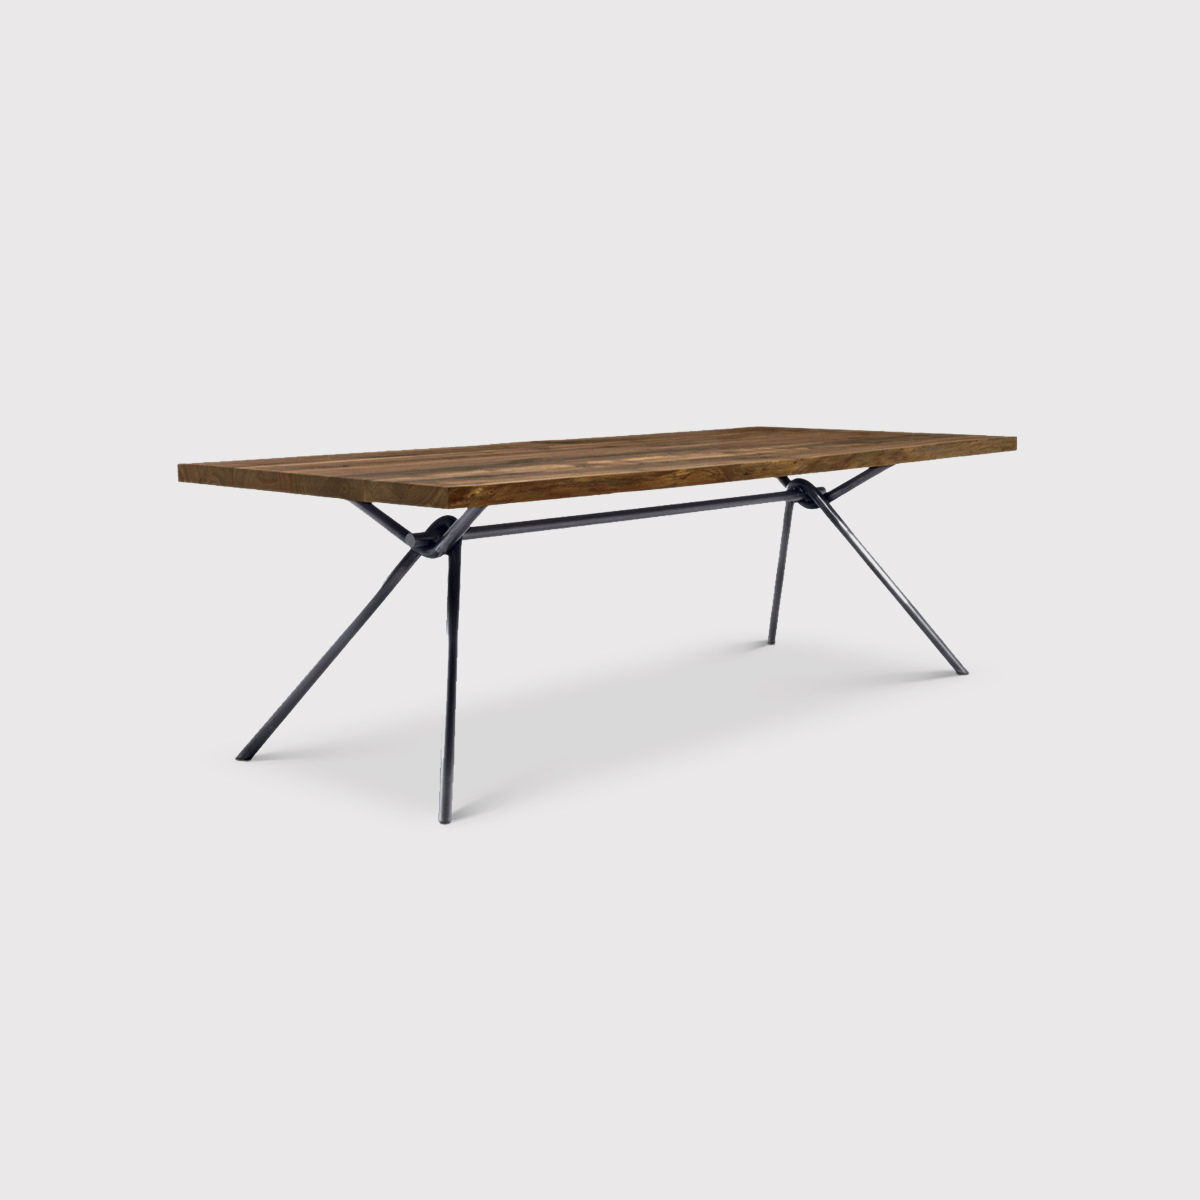 RIVA Iron Light Squared Dining Table 240x100cm, Brown | Barker & Stonehouse